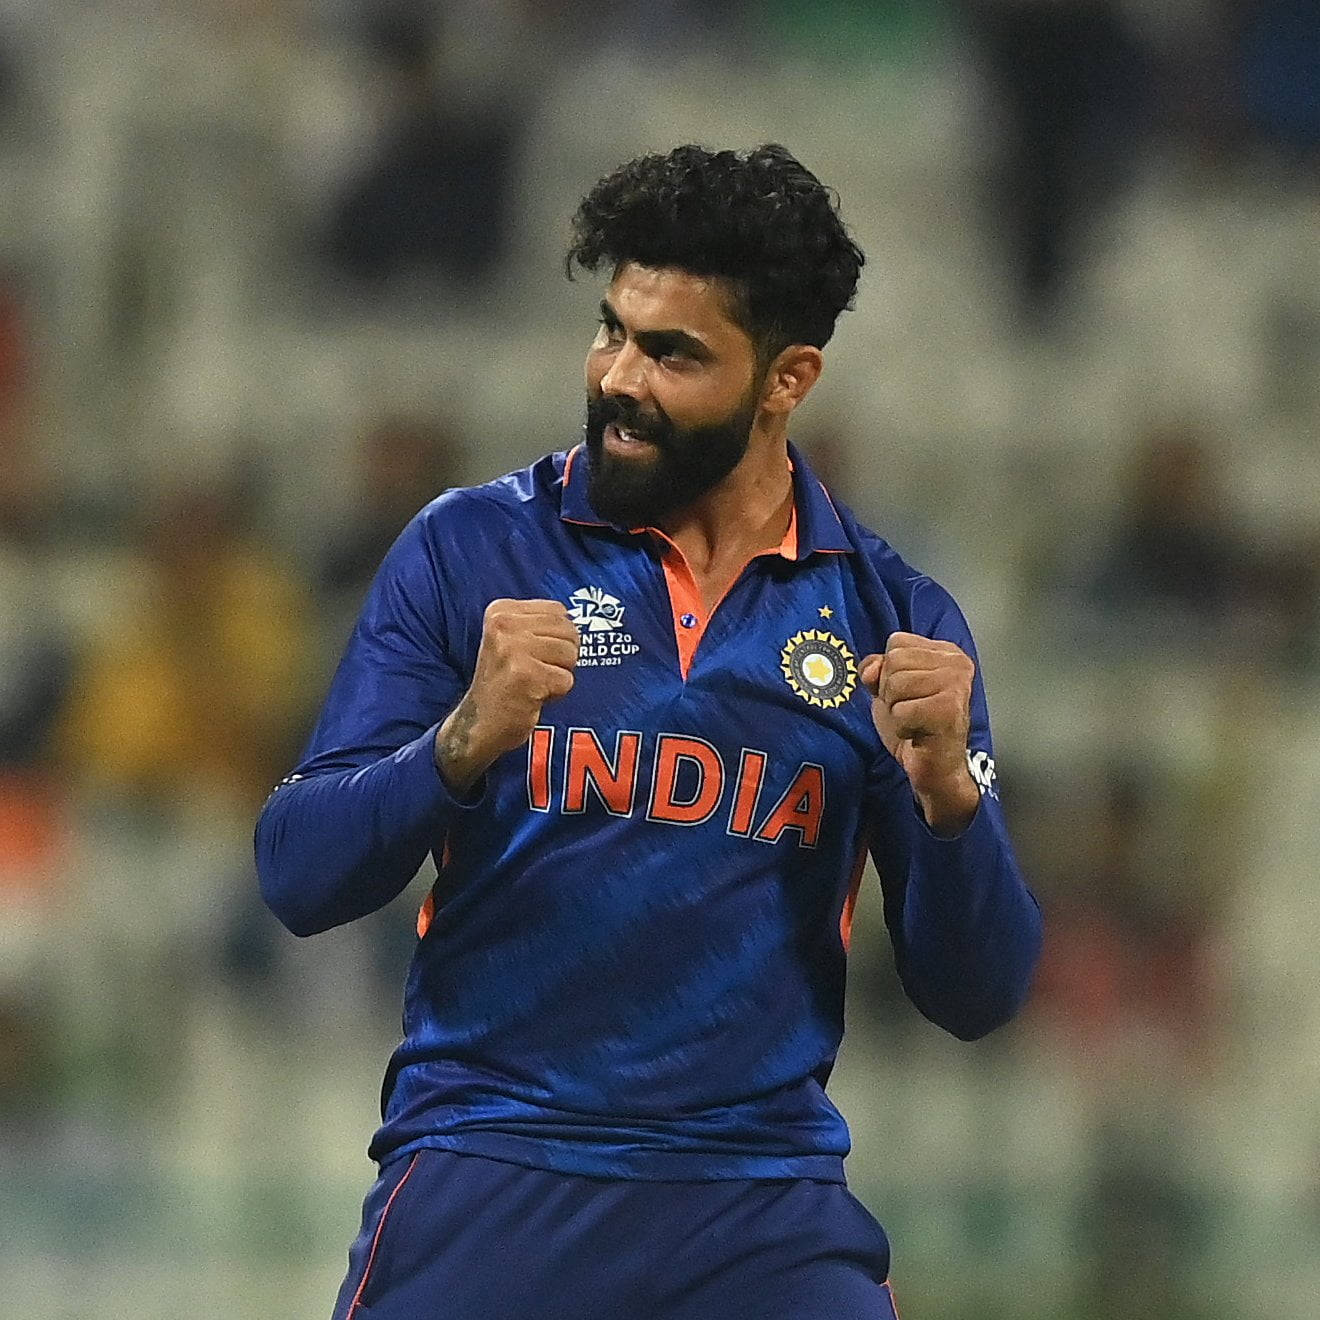 Ravindra Jadeja With Clenched Fists Wallpaper